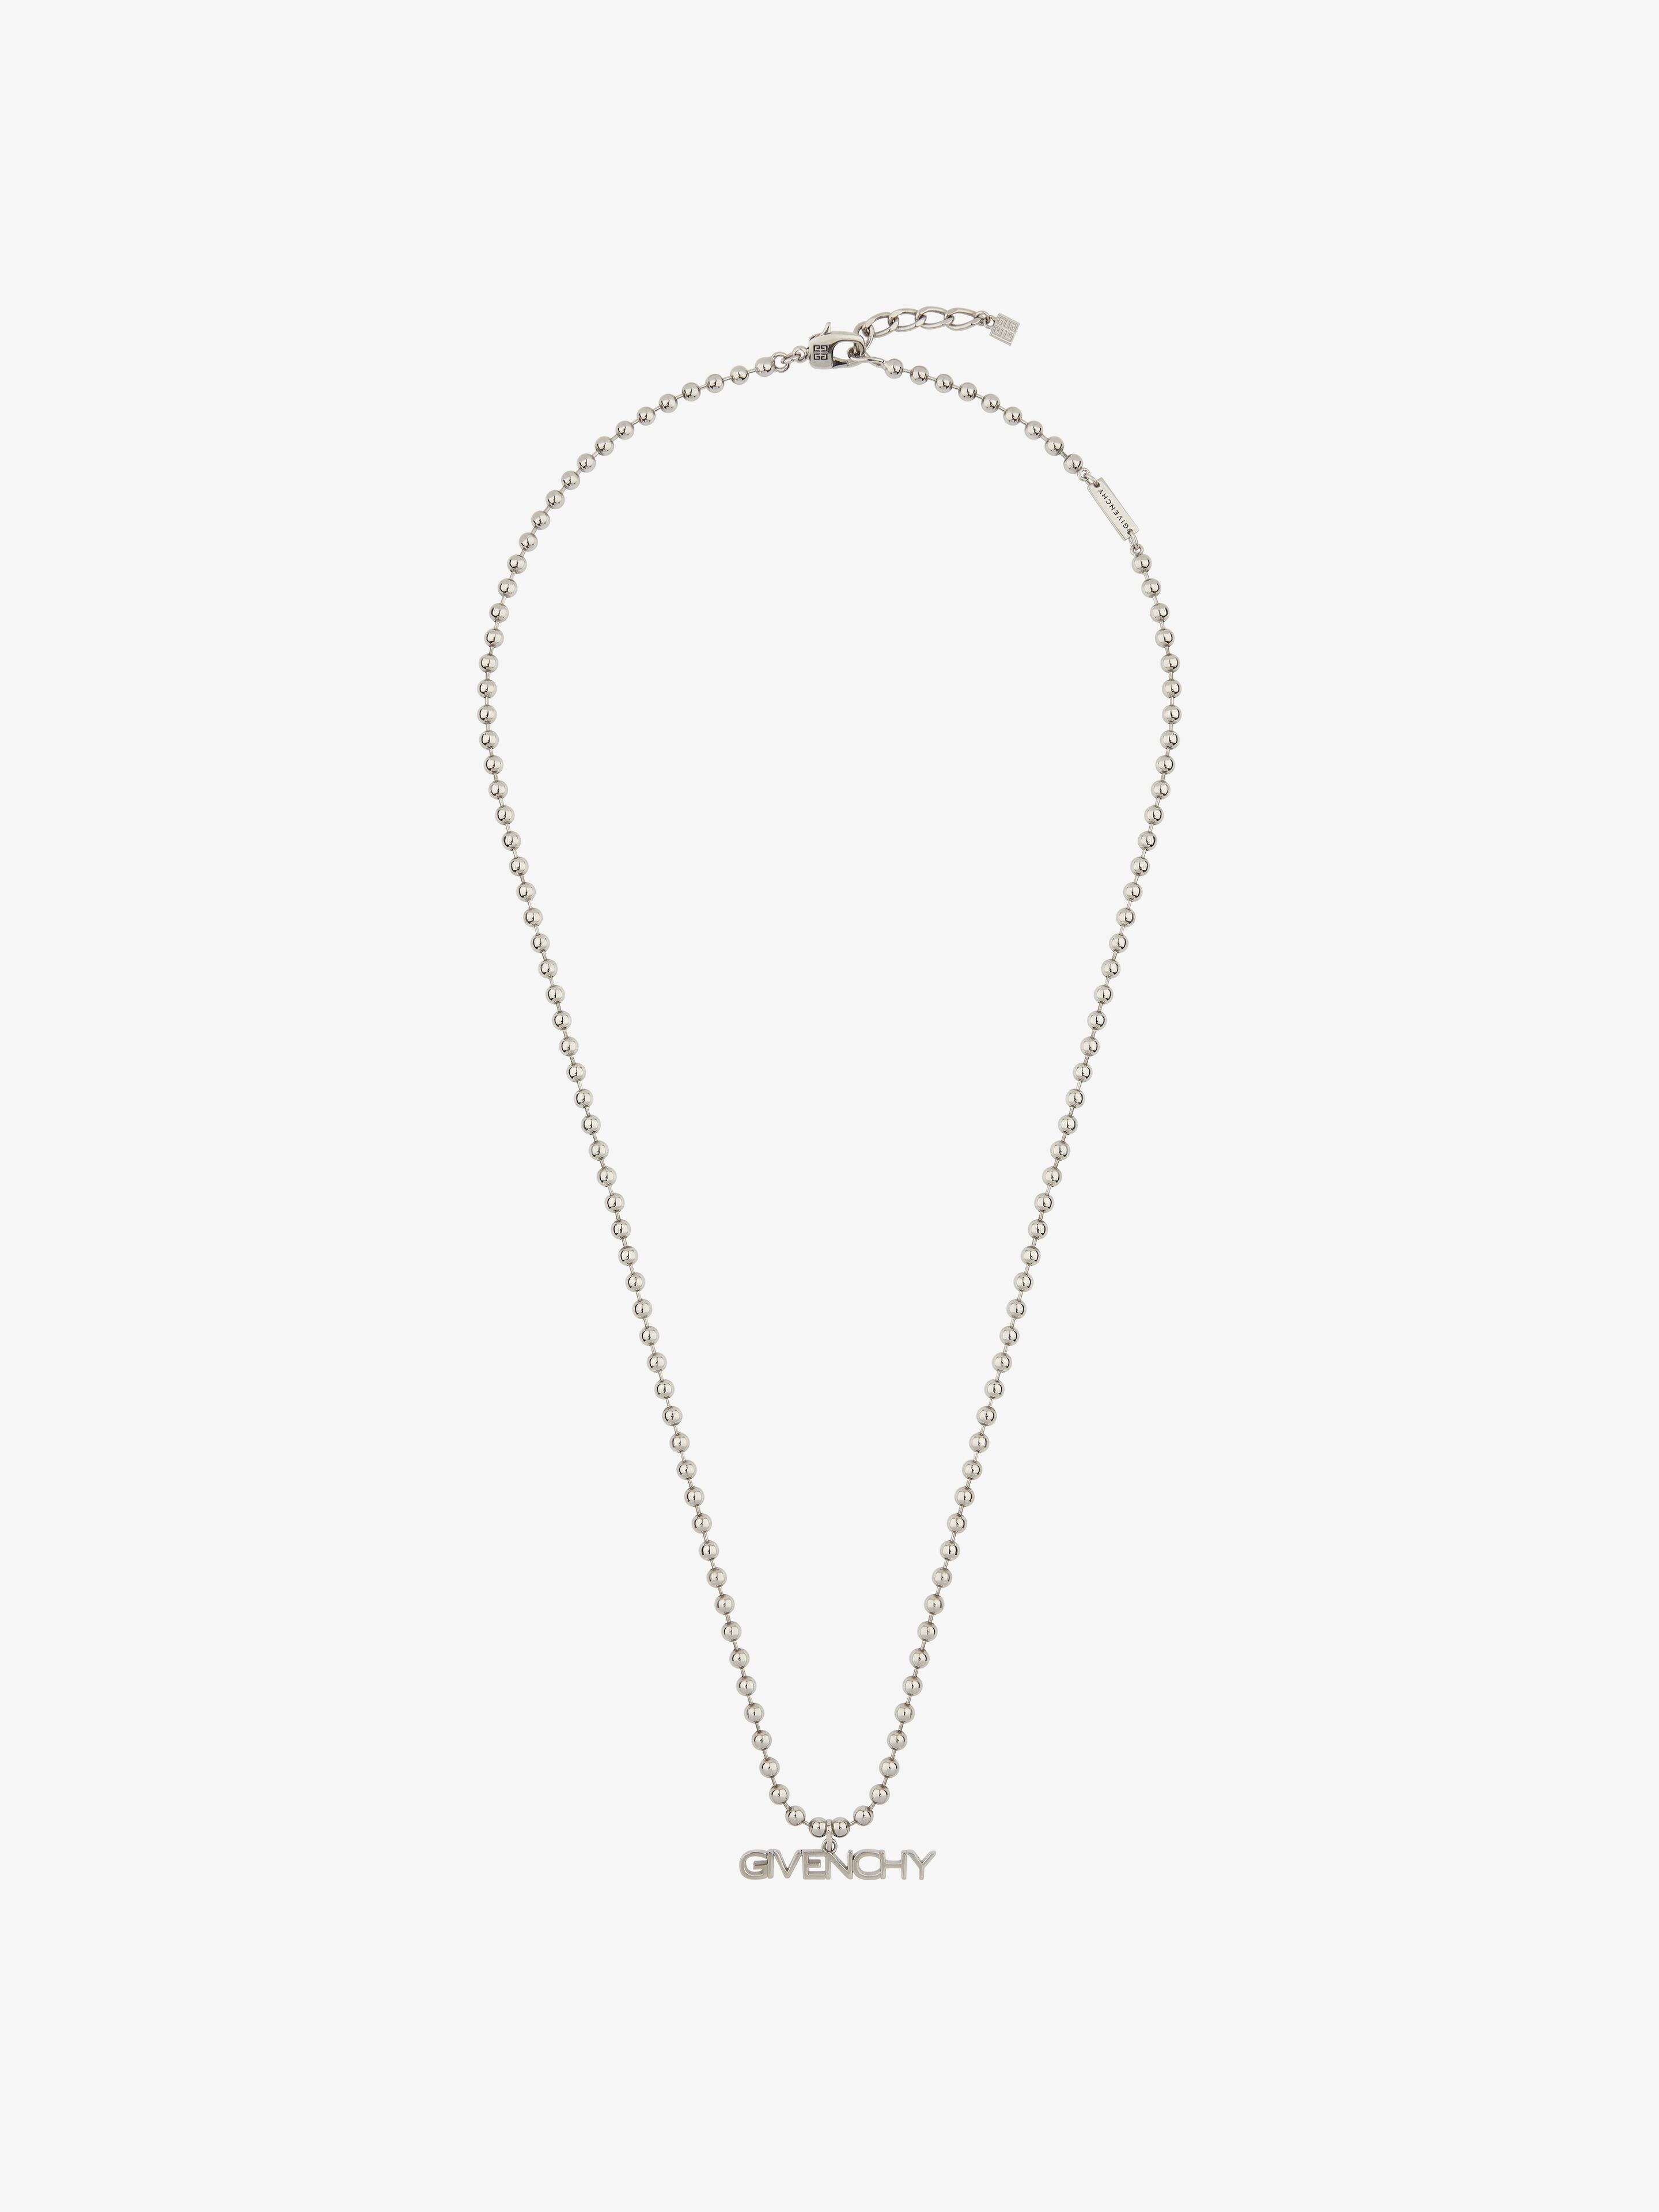 GIVENCHY NECKLACE IN METAL - 1